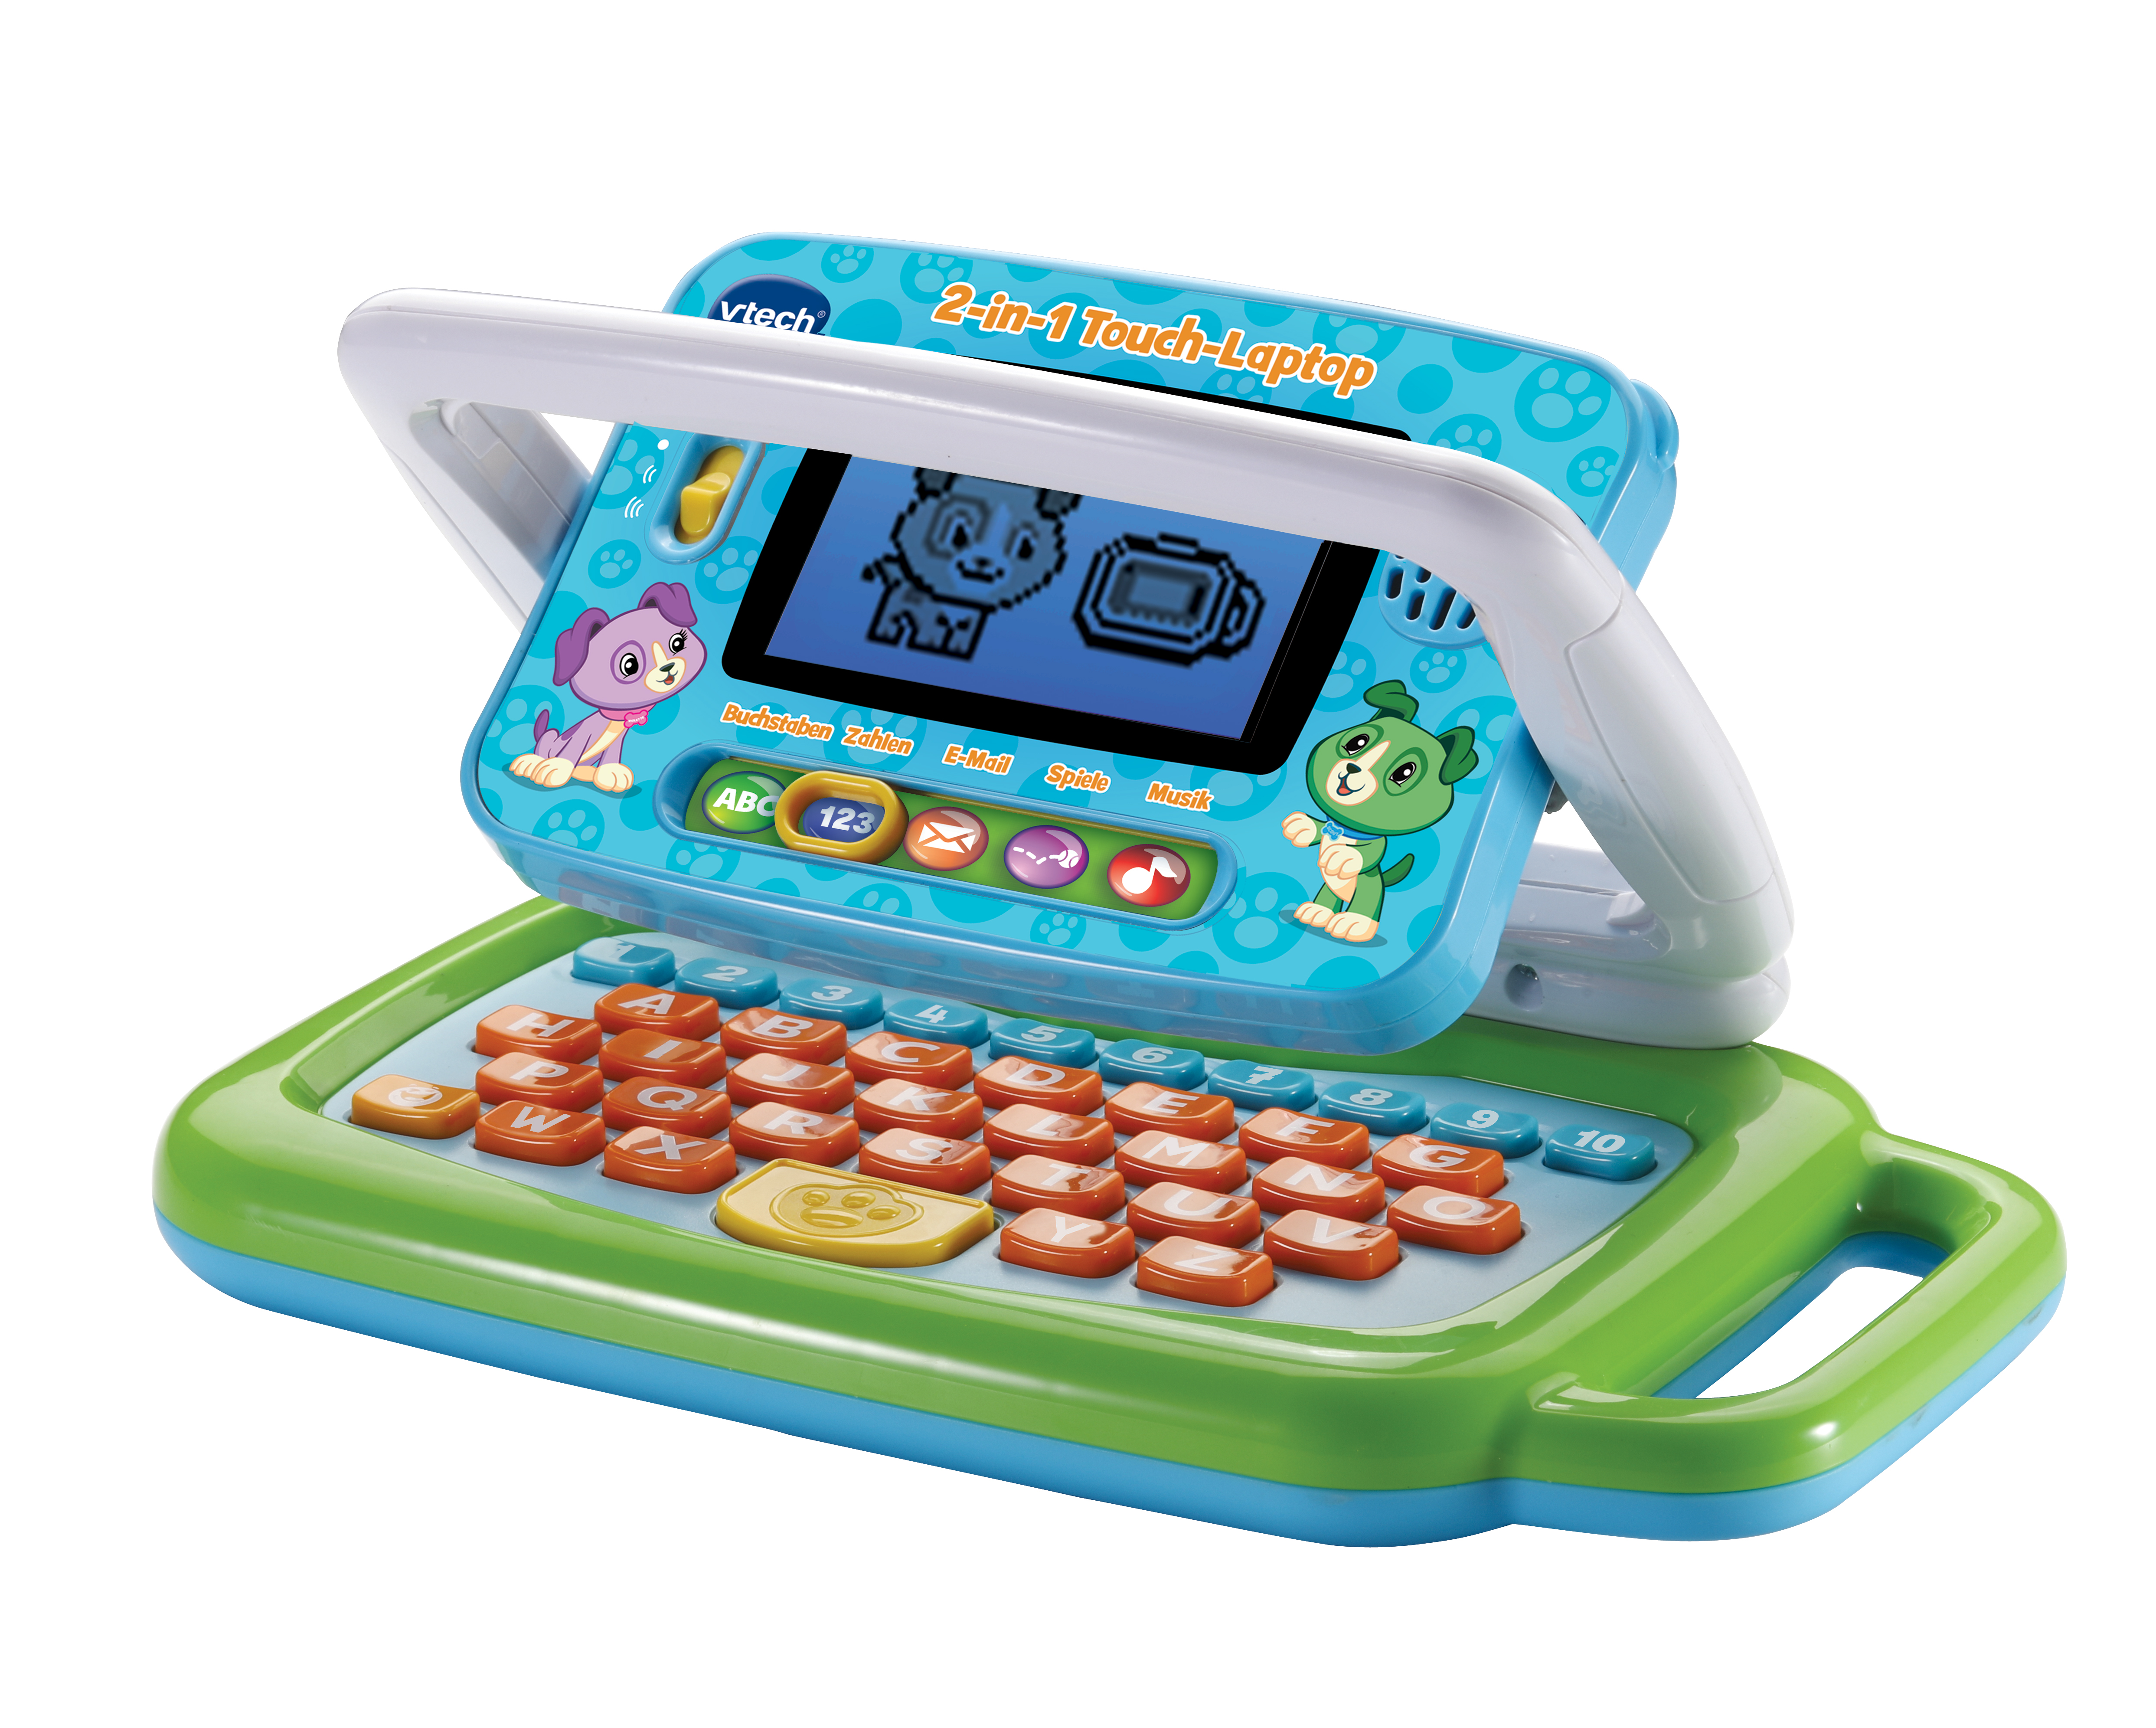 2-in-1 Touch-Laptop Mehrfarbig VTECH Lernlaptop,